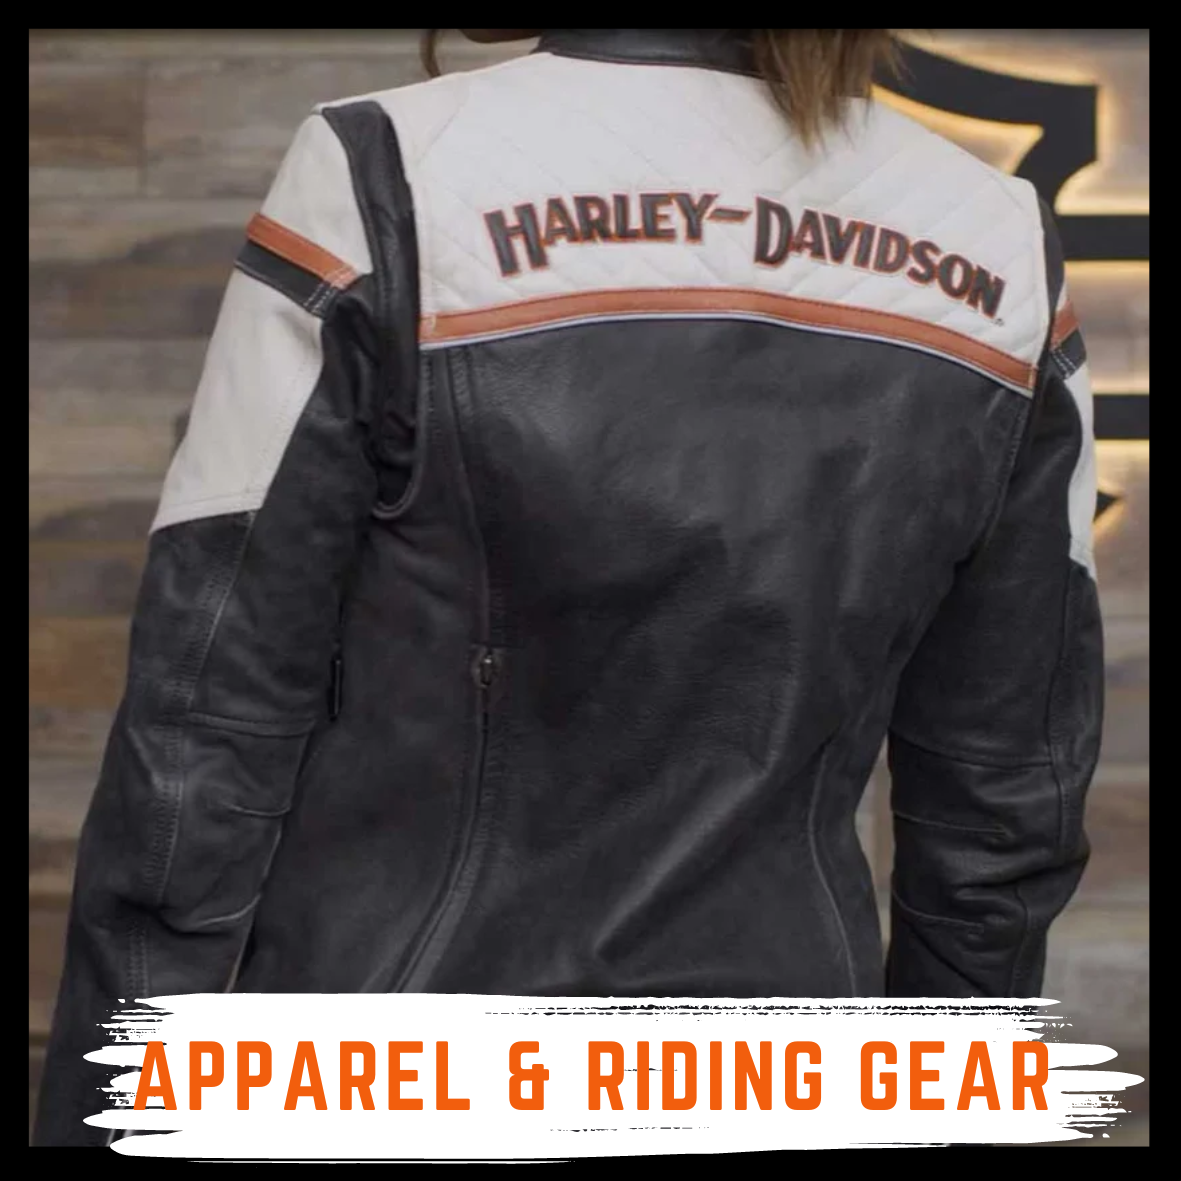 Go to tallahasseeharley.com (--thd-apparel-promotions subpage)